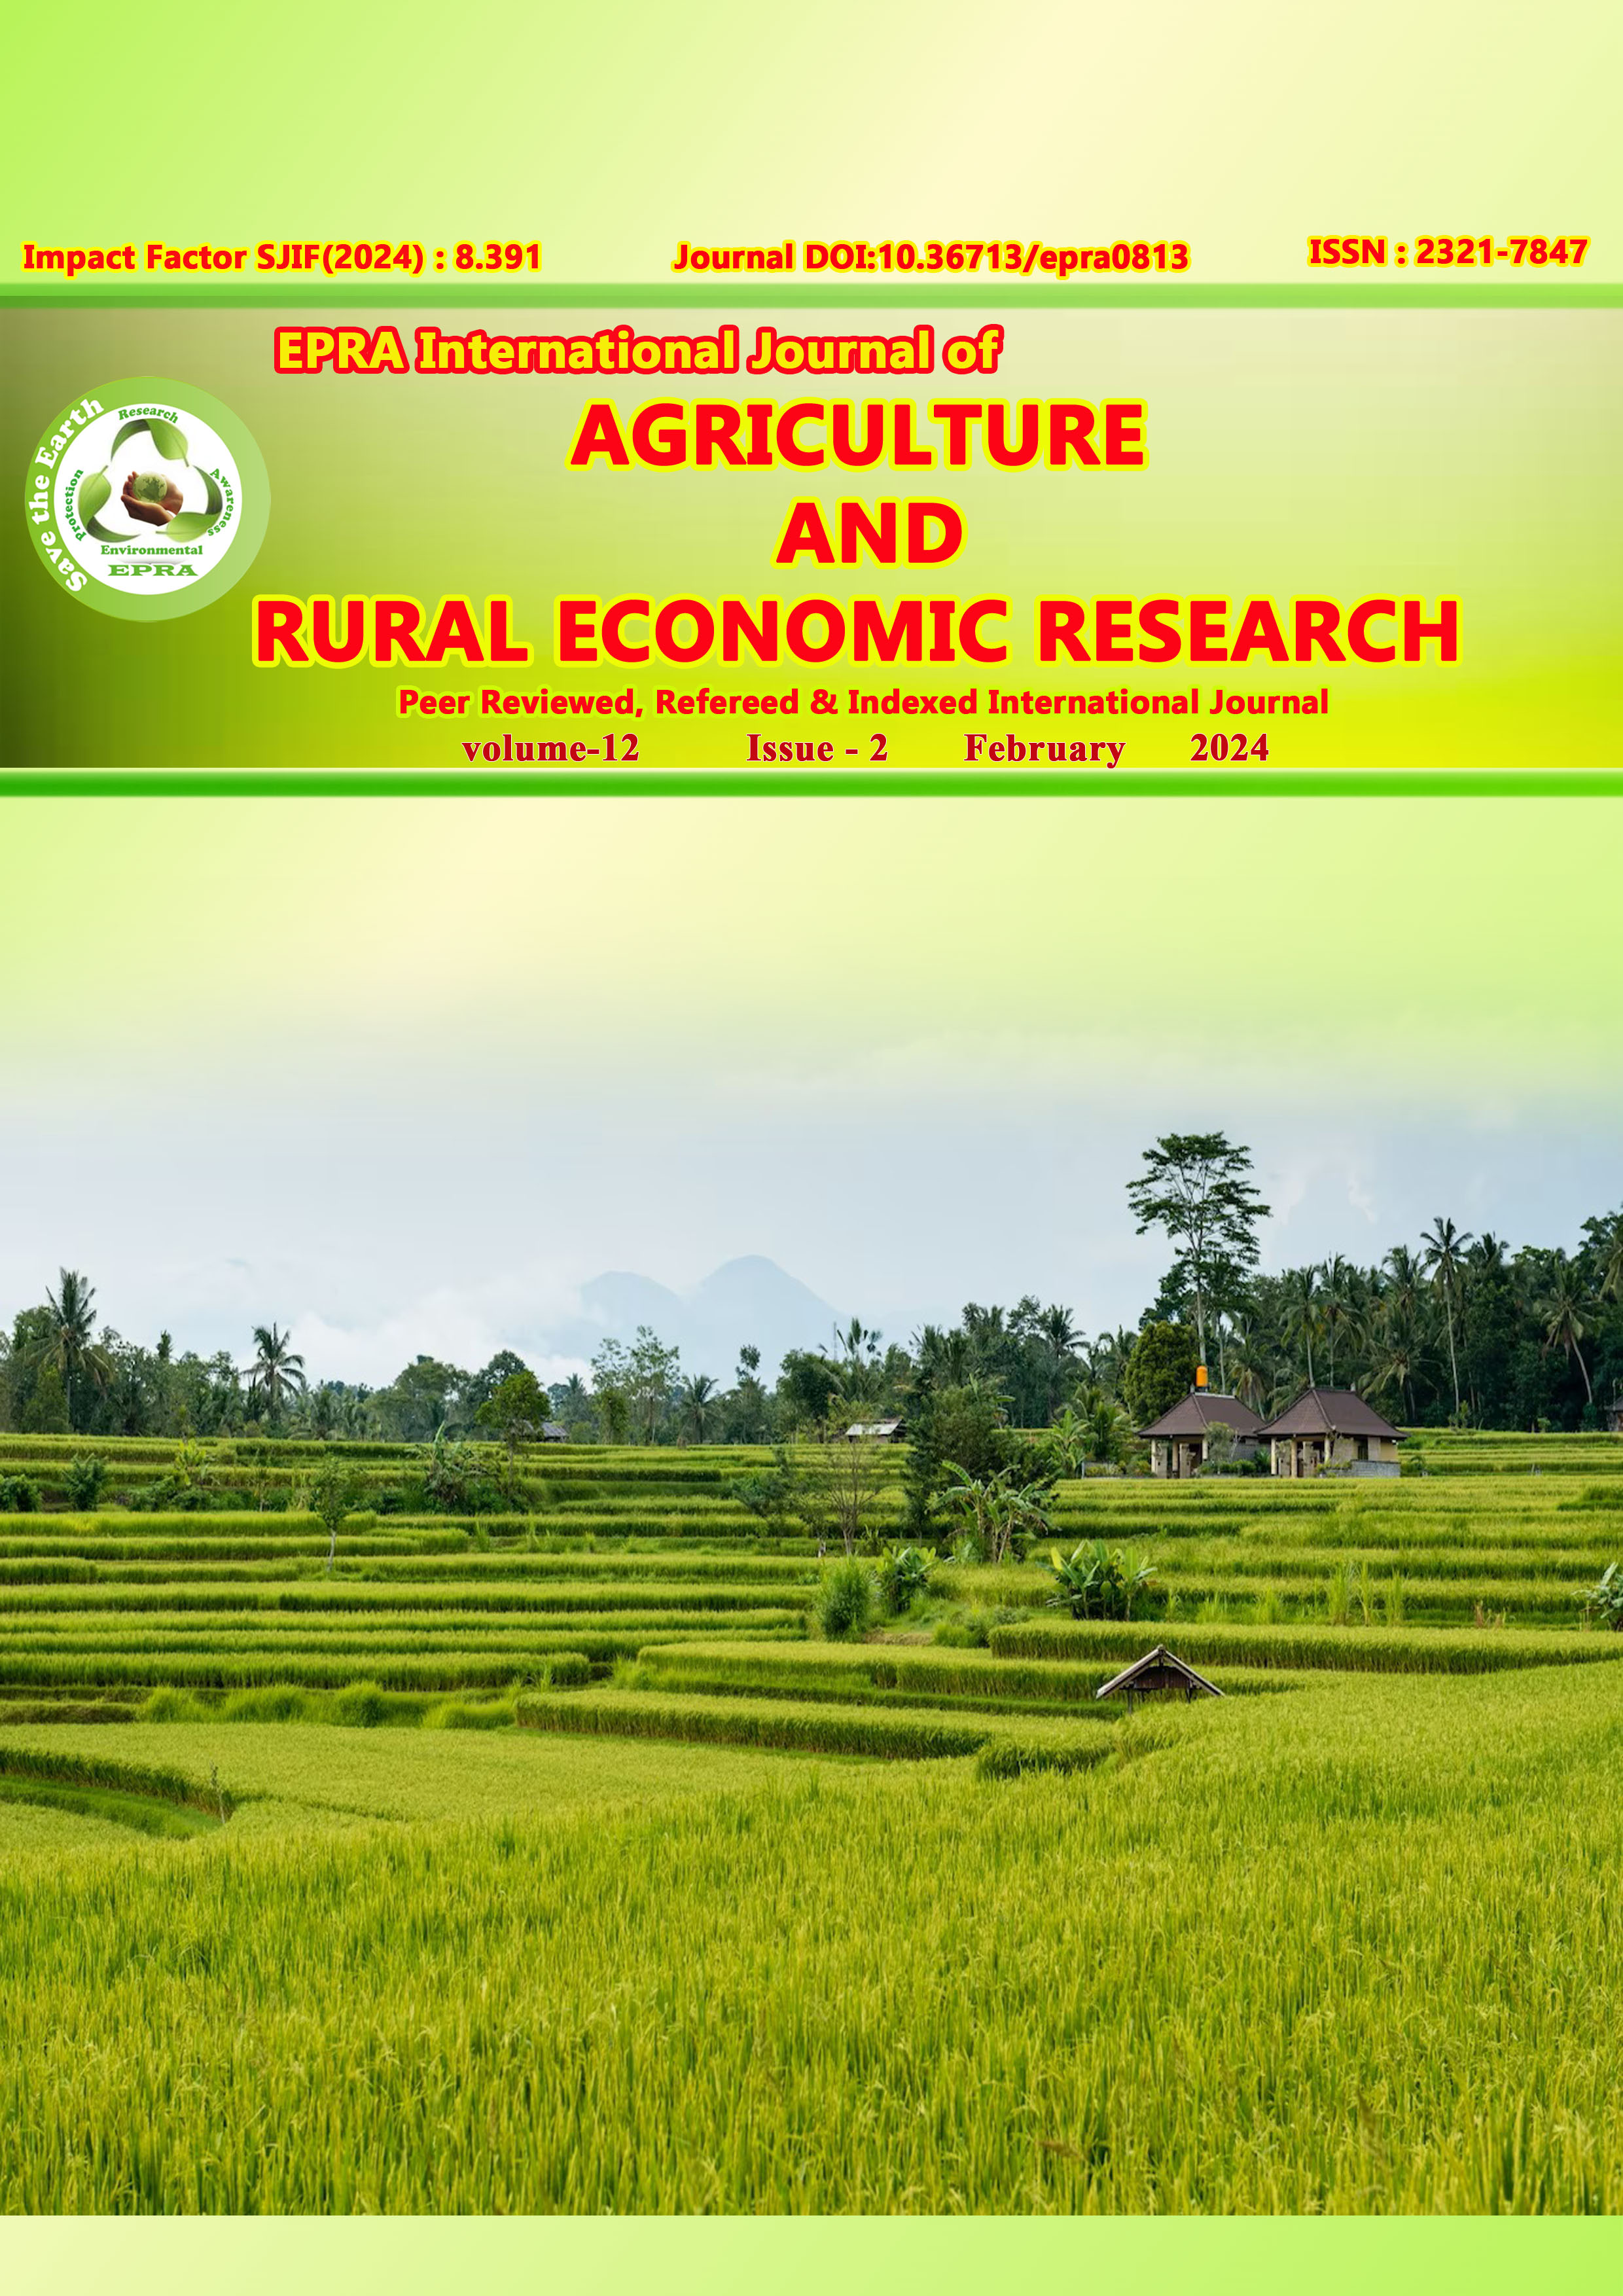 EPRA International Journal of Agriculture and Rural Economic Research (ARER)